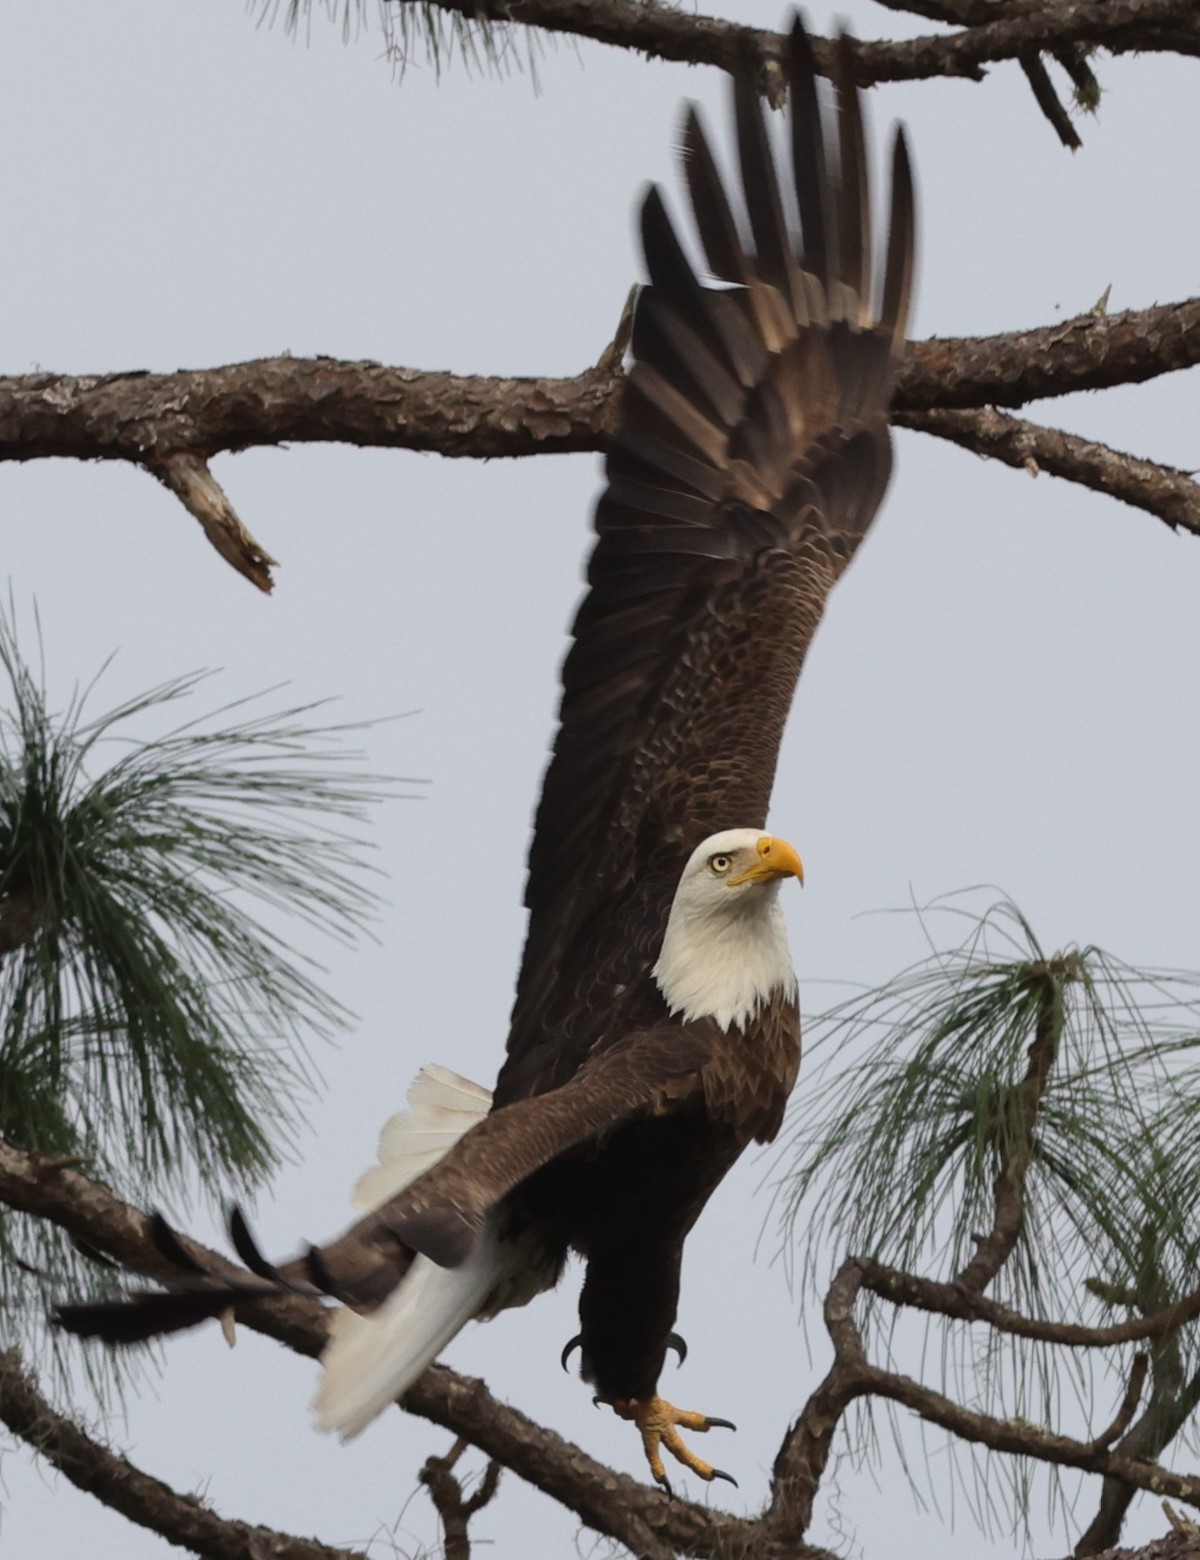 American bald eagle takes flight in the Village of Fenney